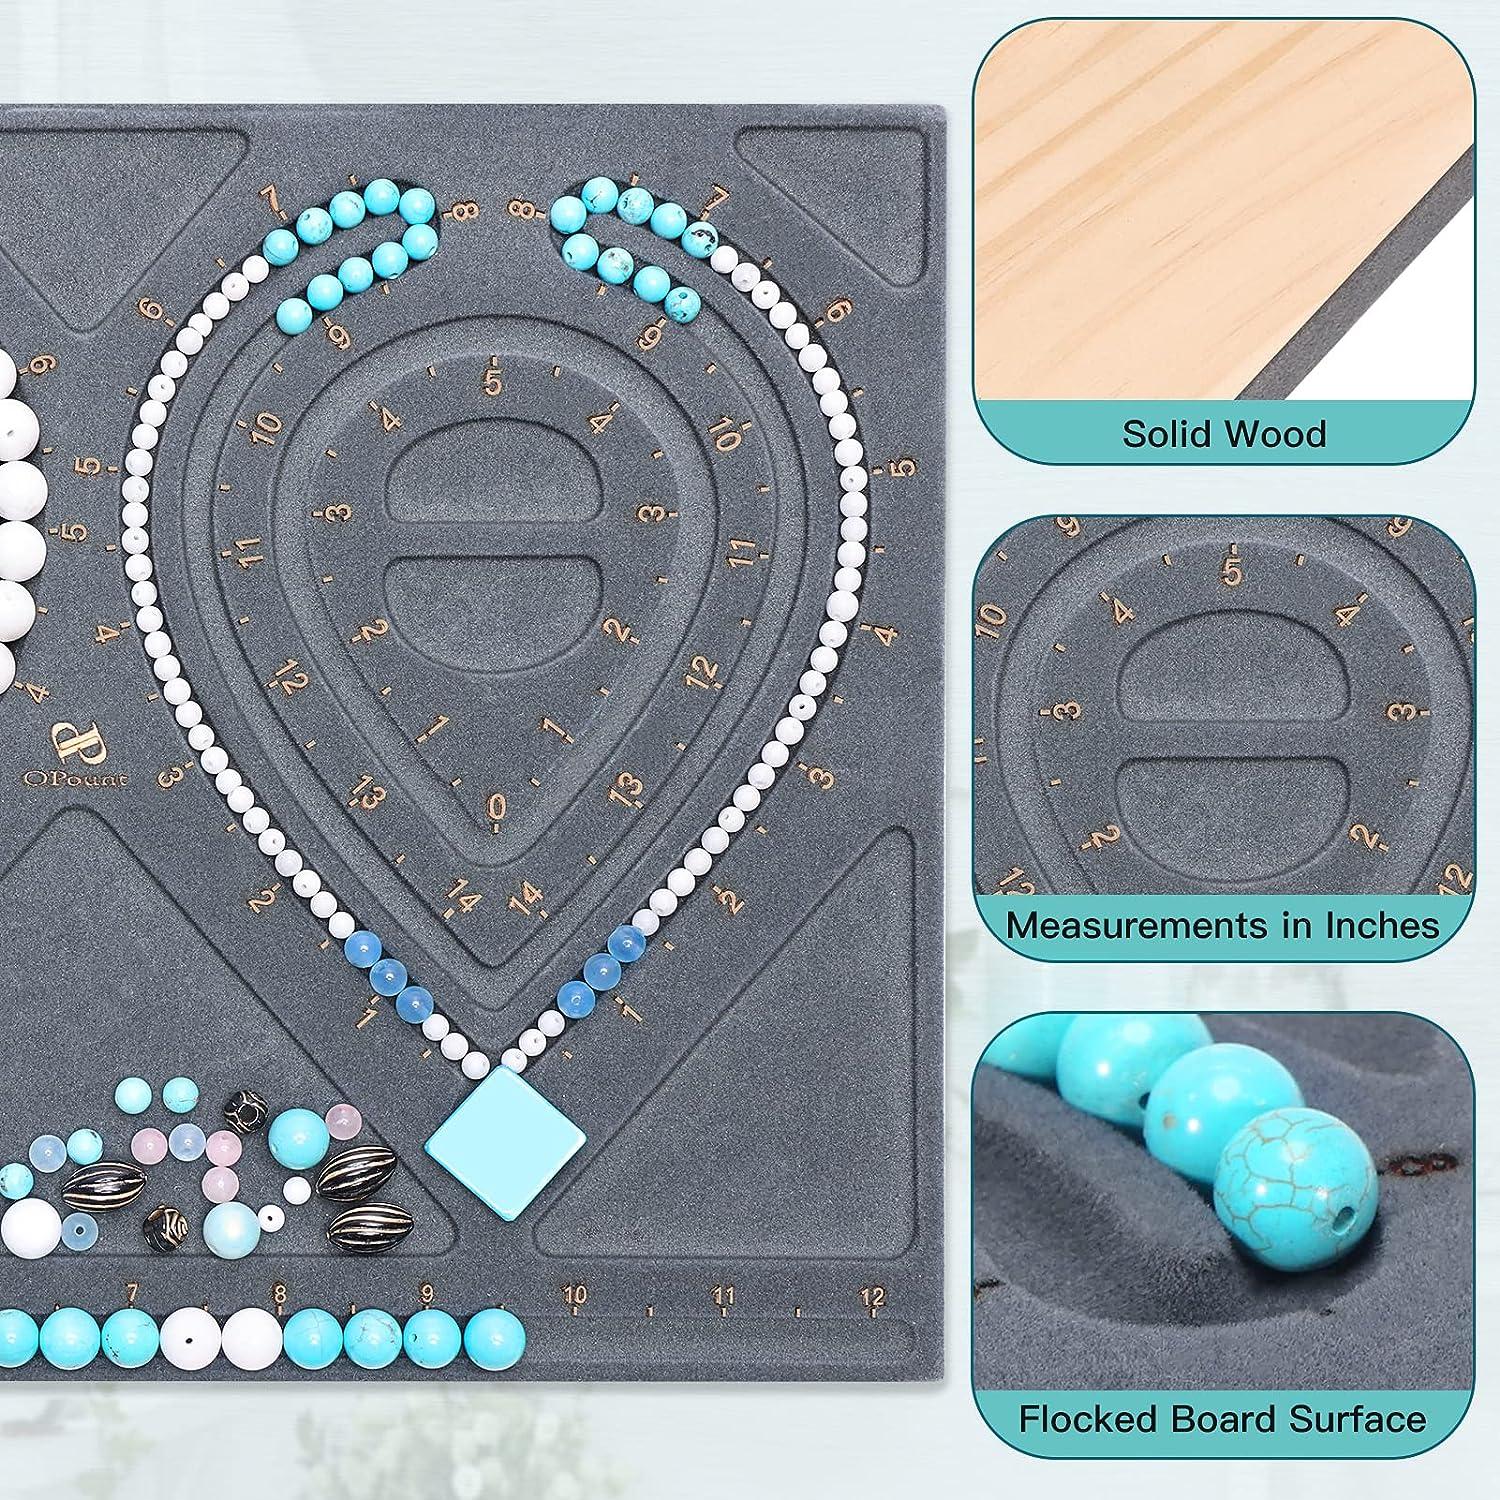 PP OPOUNT Wooden Jewelry Design Board, Flocked Bead Board for